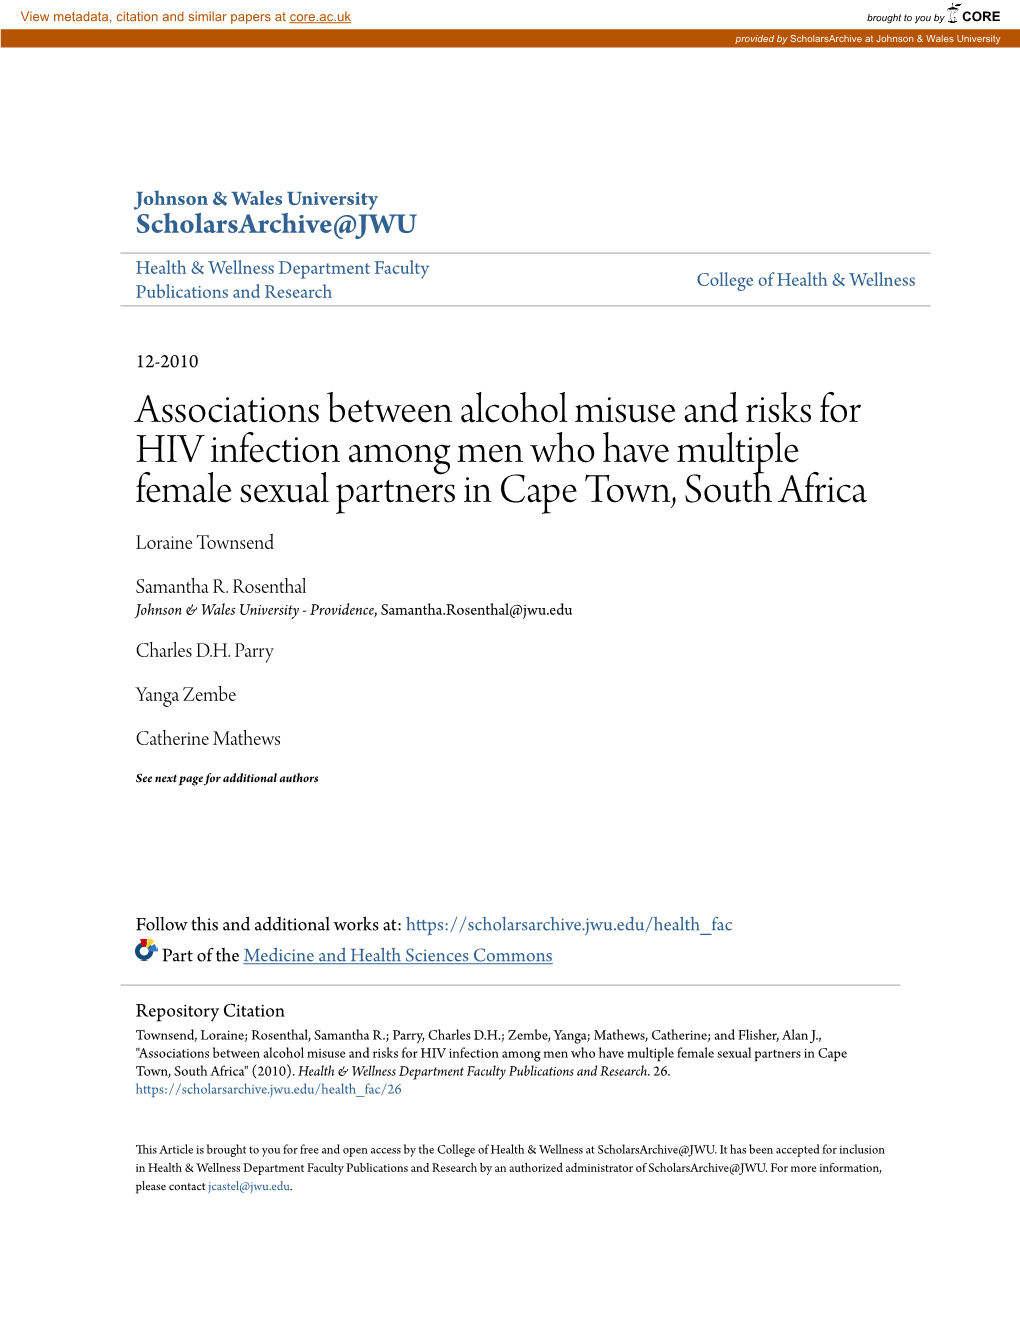 Associations Between Alcohol Misuse and Risks for HIV Infection Among Men Who Have Multiple Female Sexual Partners in Cape Town, South Africa Loraine Townsend